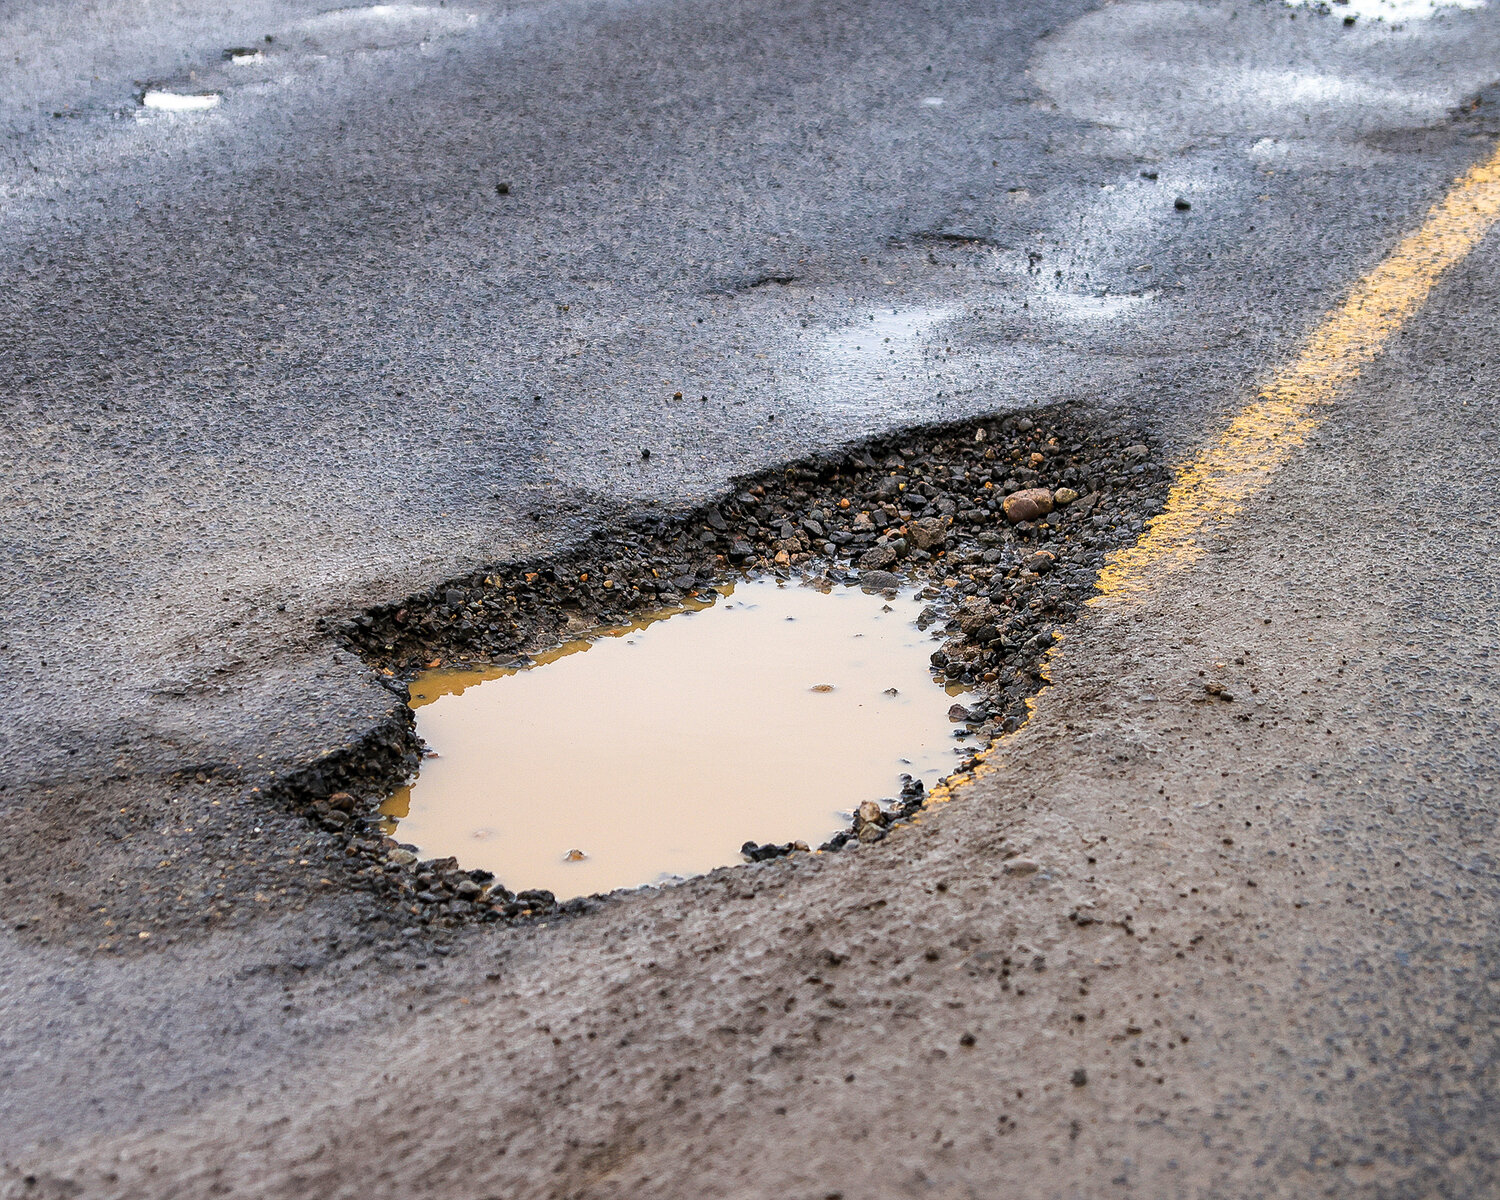 Kelly Melroy, facilities supervisor for the city of Ridgefield, said the amount of potholes fixed after the recent storms was normal when compared to previous winter weather events. These potholes were located on Northeast 279th Street in Ridgefield.